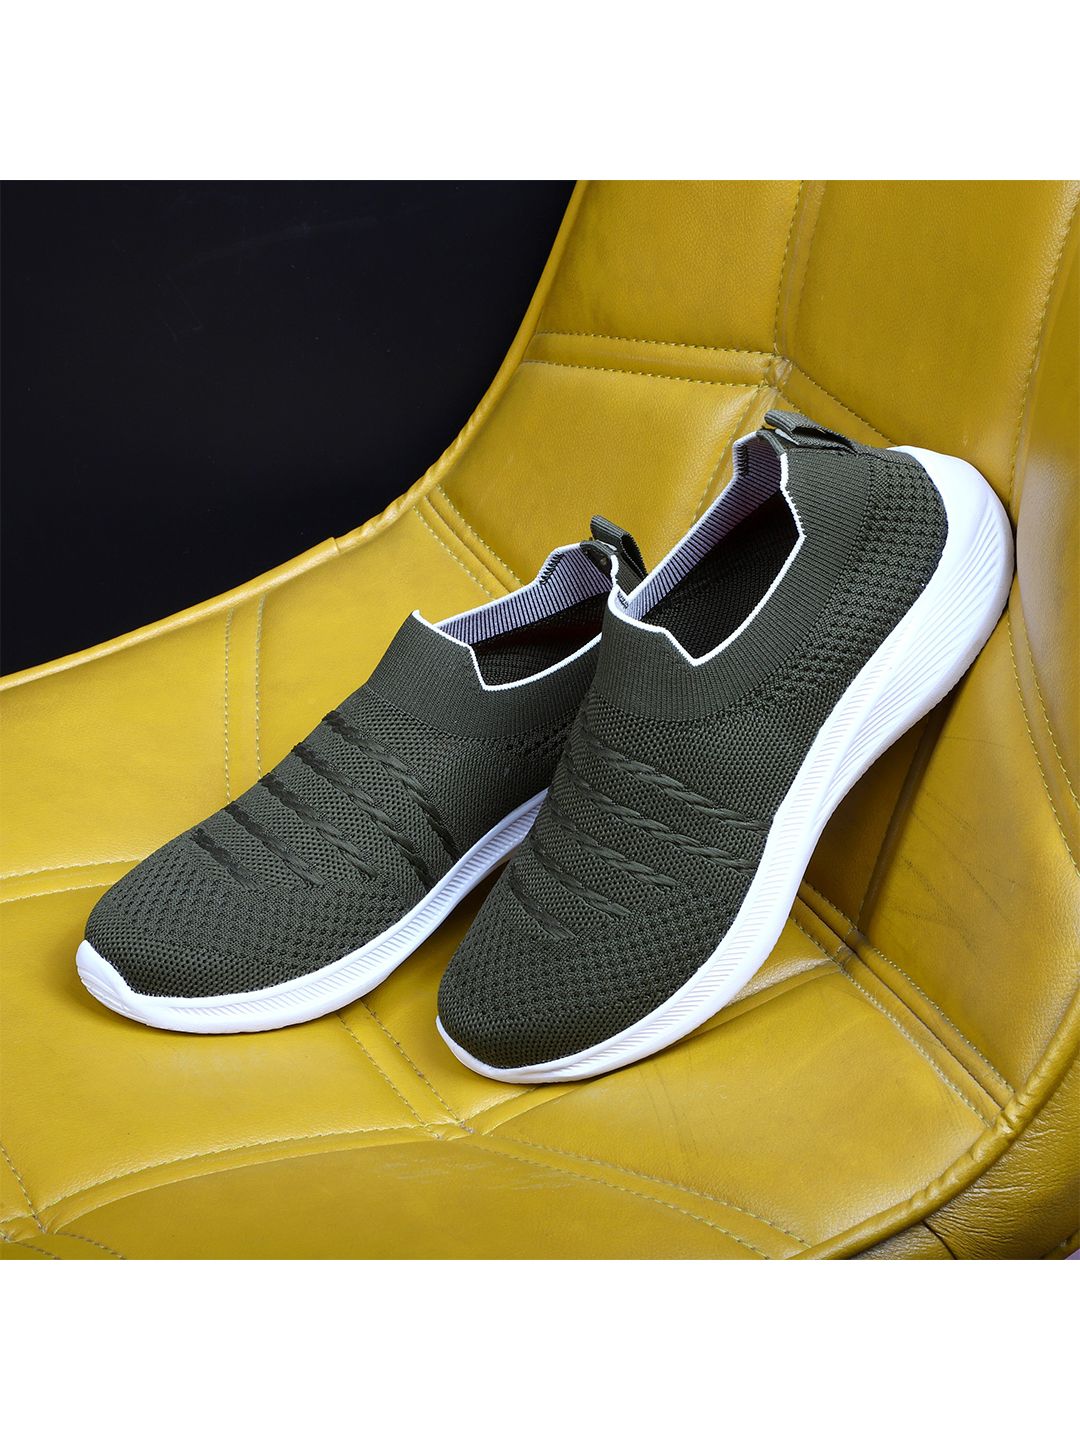 TPENT Women Olive Green Mesh Running Non-Marking Shoes Price in India